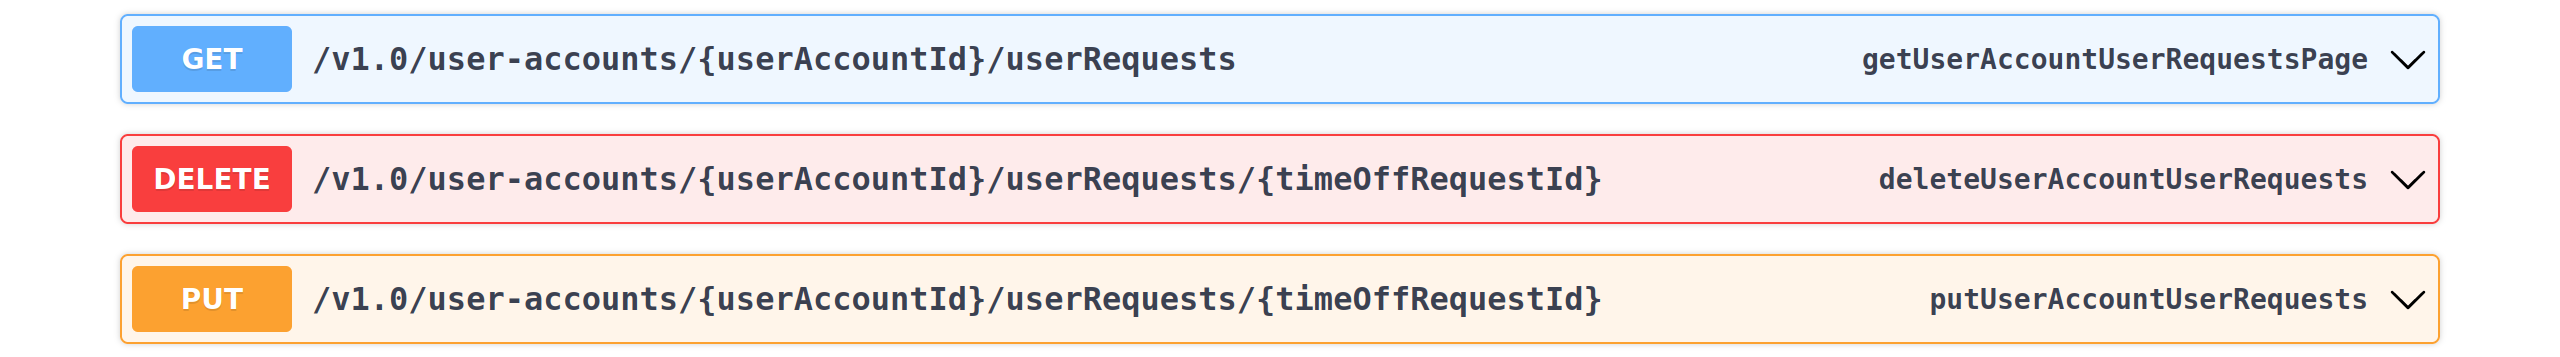 Liferay generates REST endpoints for querying and managing the relationship.